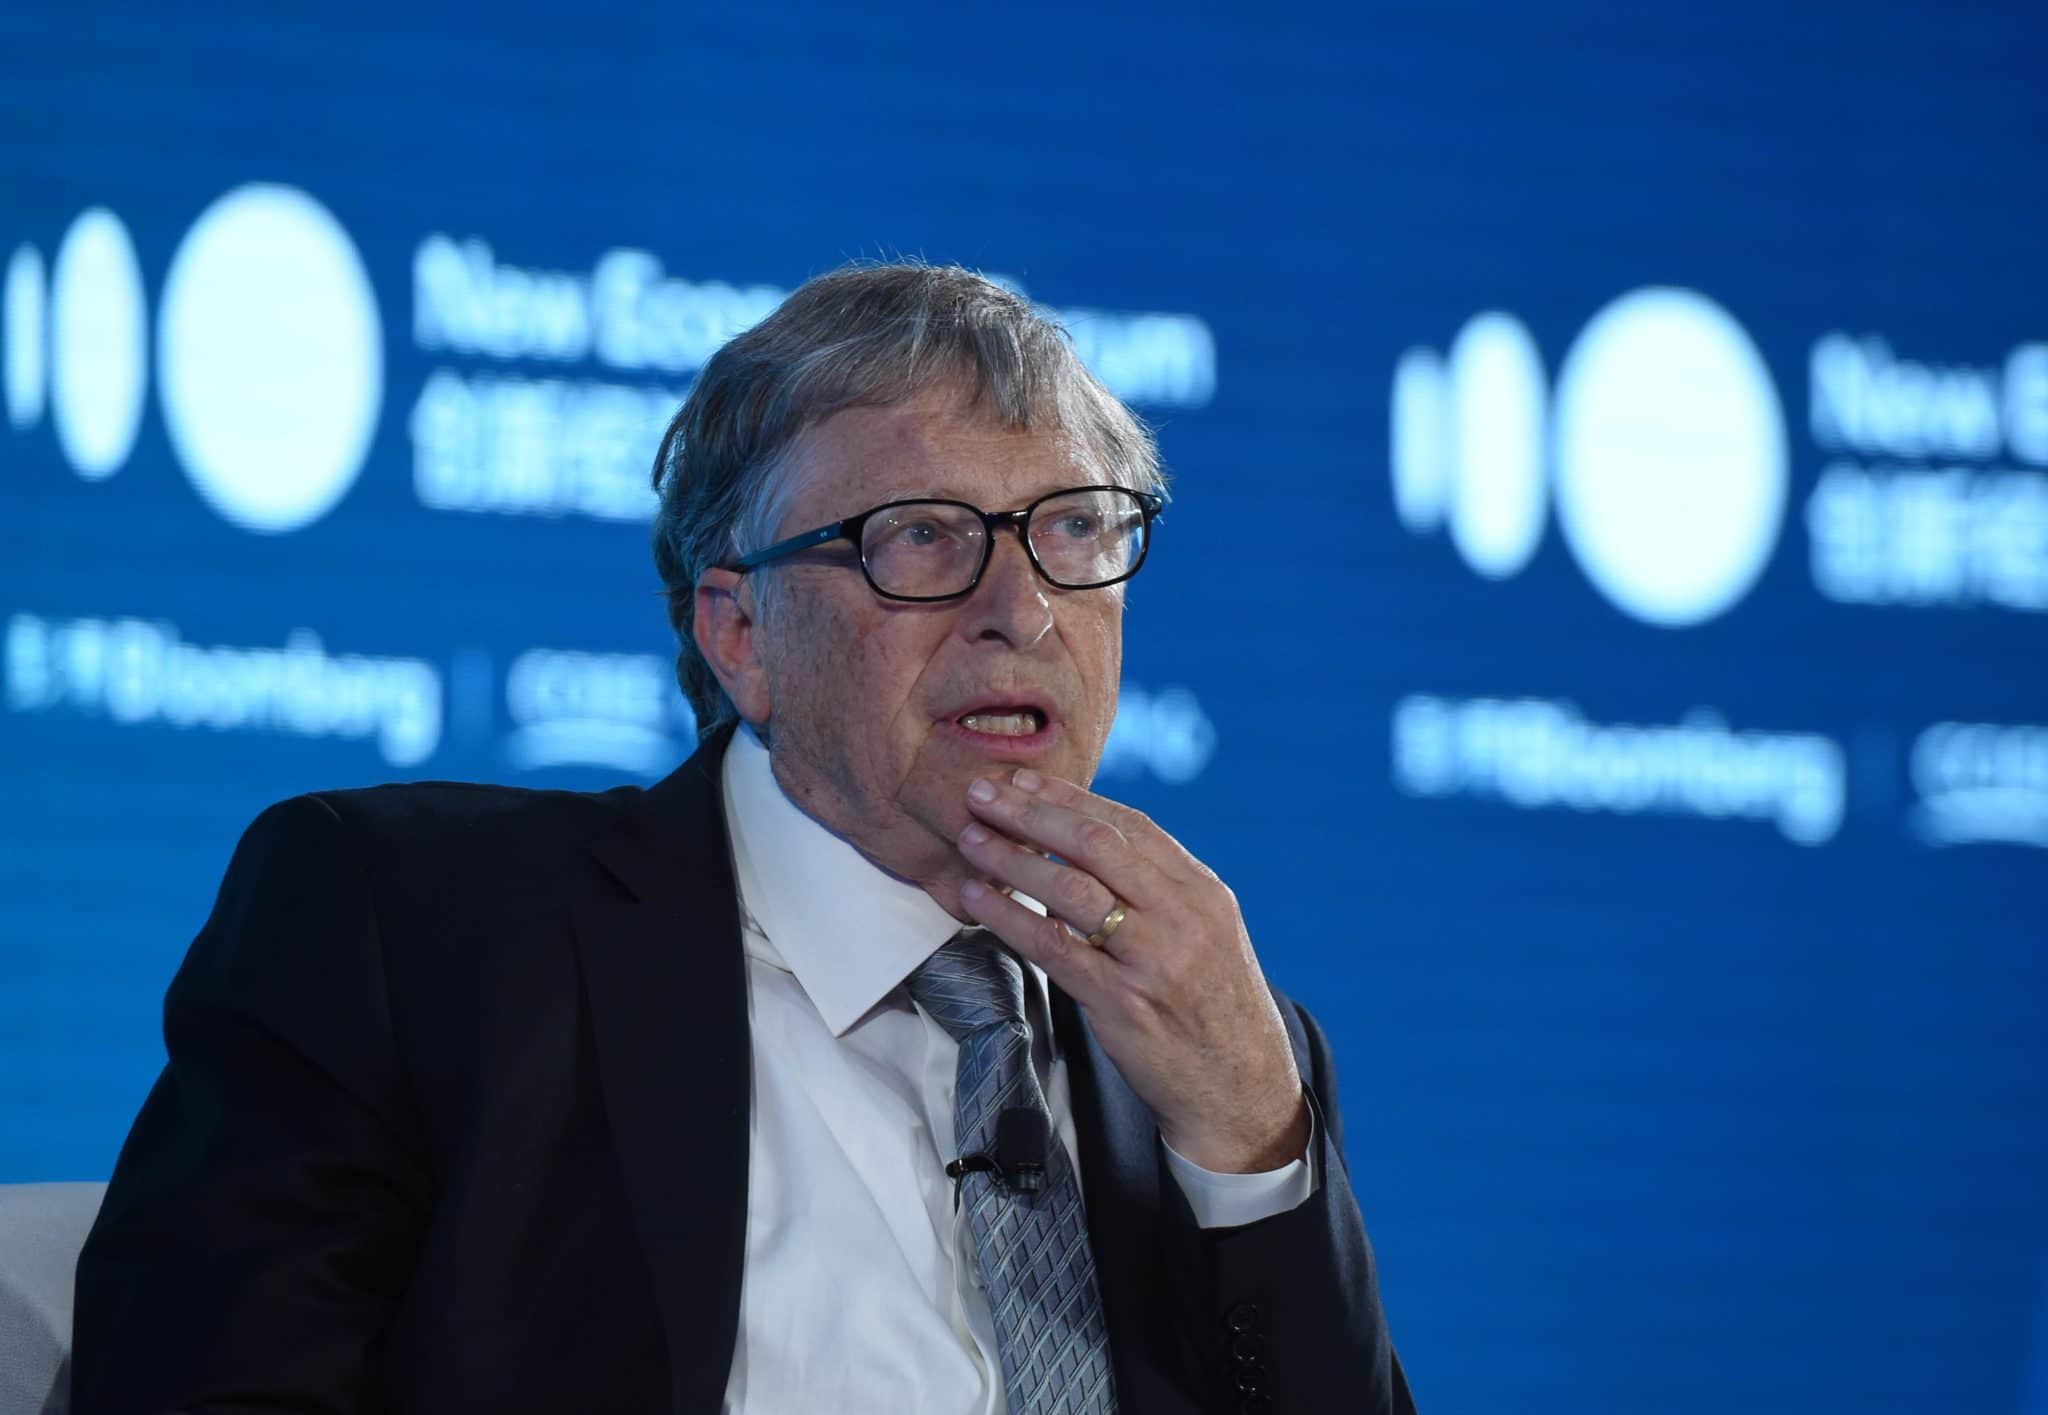 Bill Gates says six Covid vaccines could be available by spring 2021